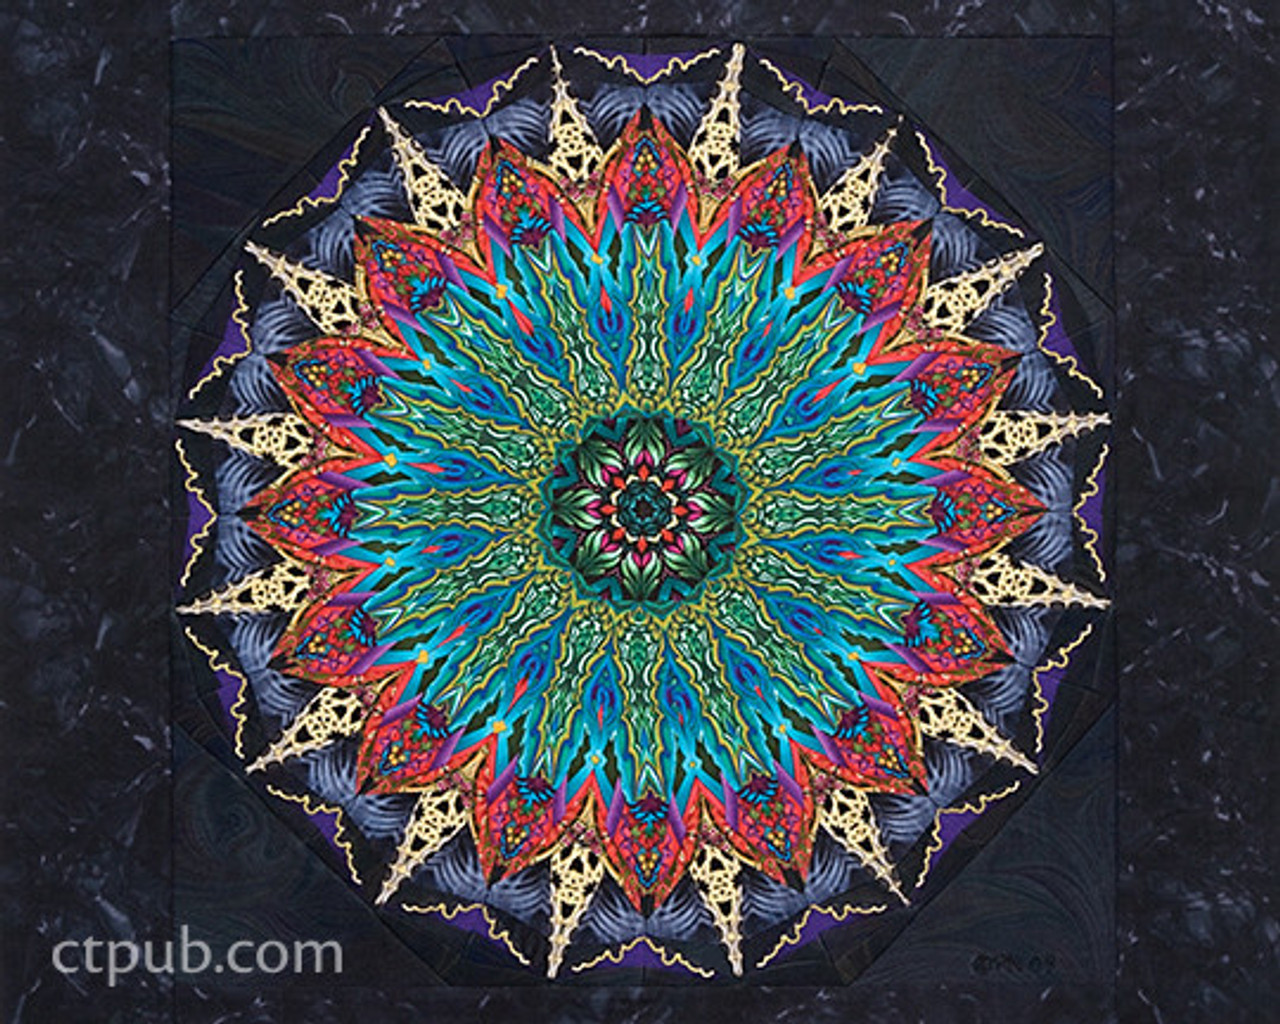 Clearance - Gradients Kaleidoscope - Mandala Panel - Blue Moda Digital  752106490338 - Quilt in a Day / Quilting Fabric